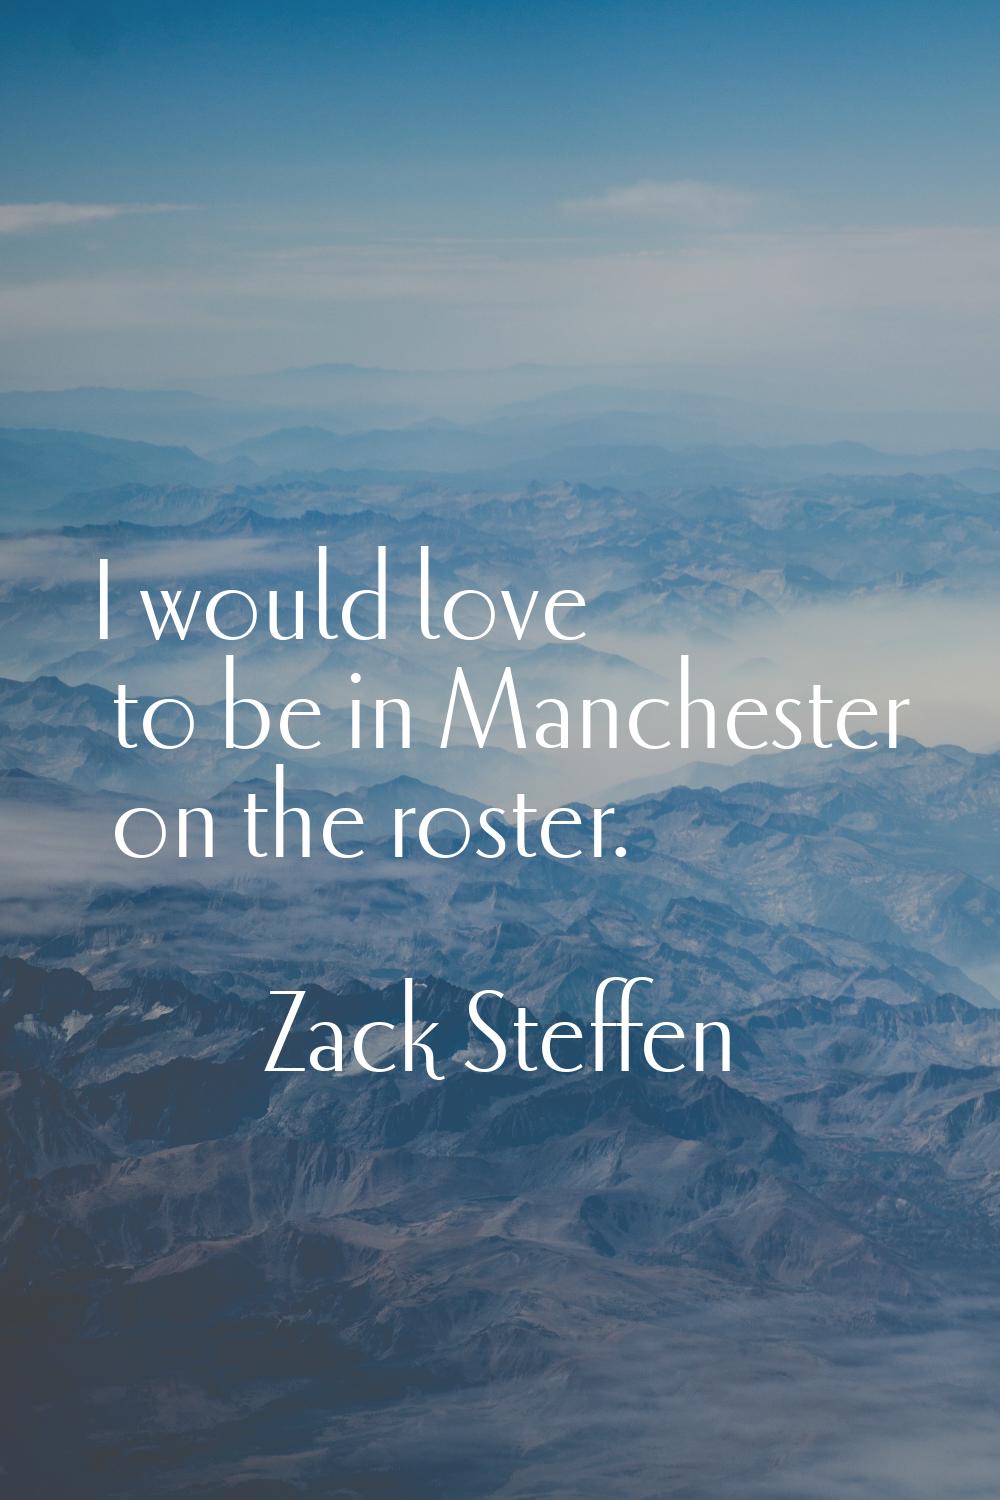 I would love to be in Manchester on the roster.